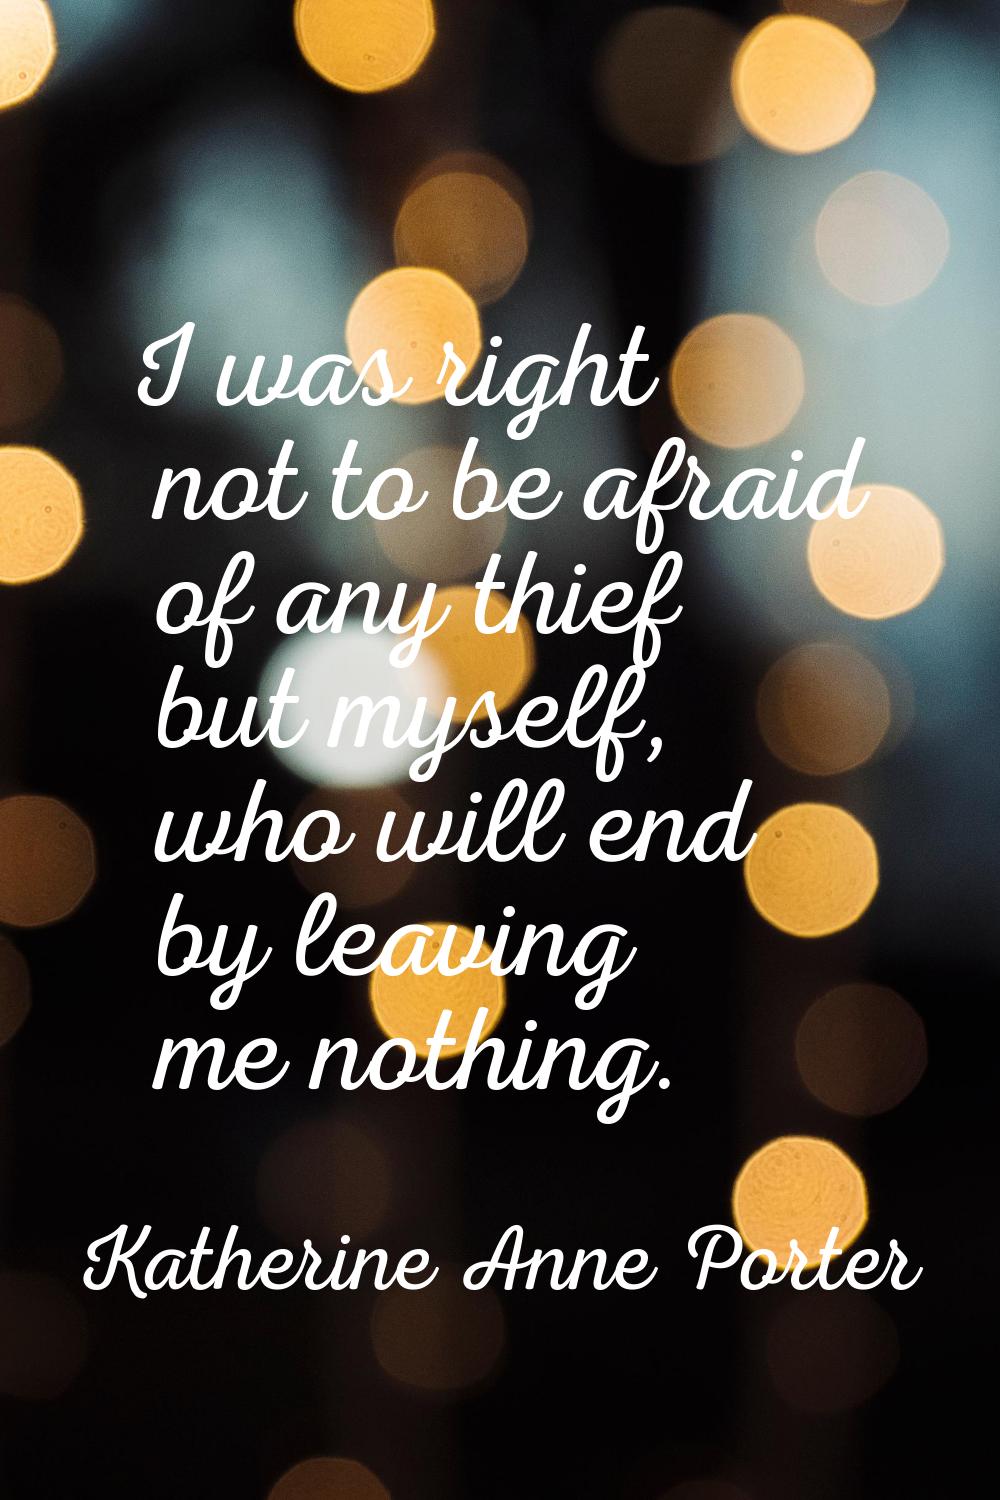 I was right not to be afraid of any thief but myself, who will end by leaving me nothing.